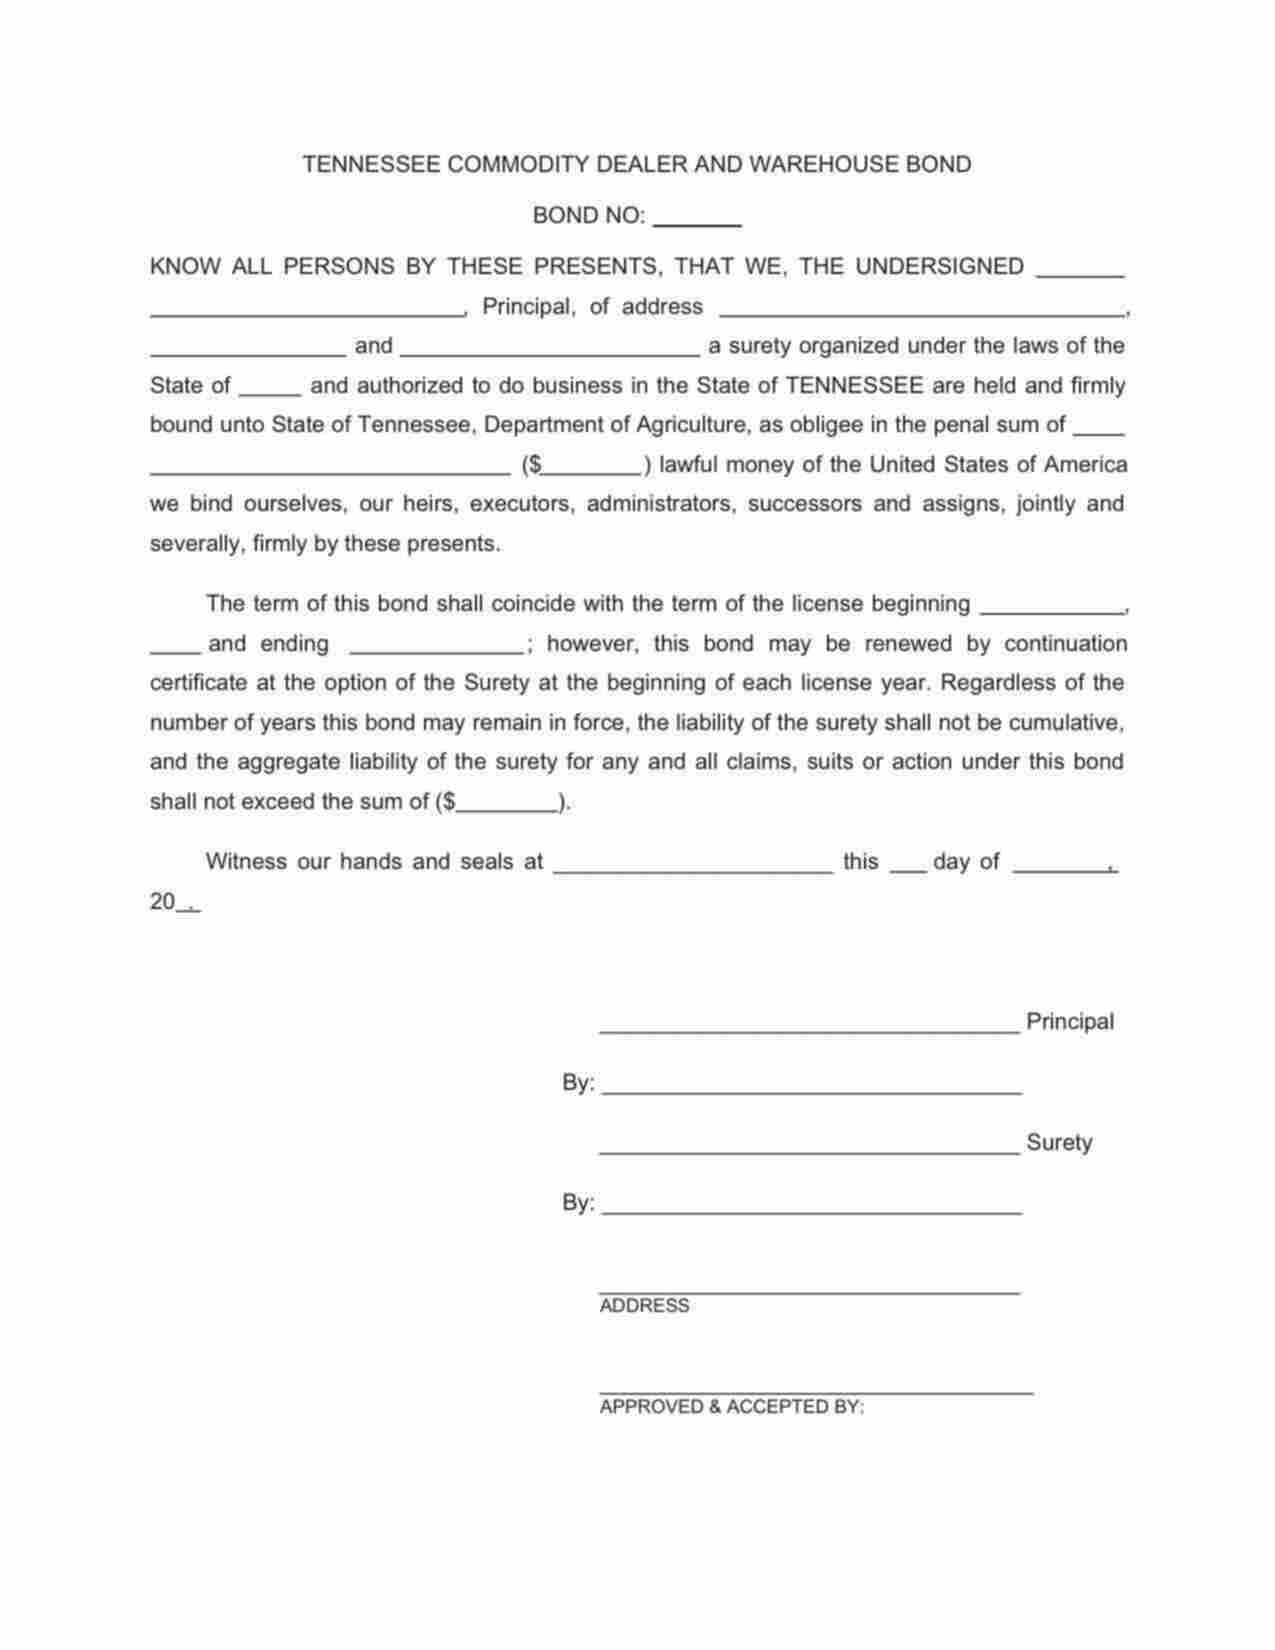 Tennessee Commodity Dealer and Warehouse Bond Form